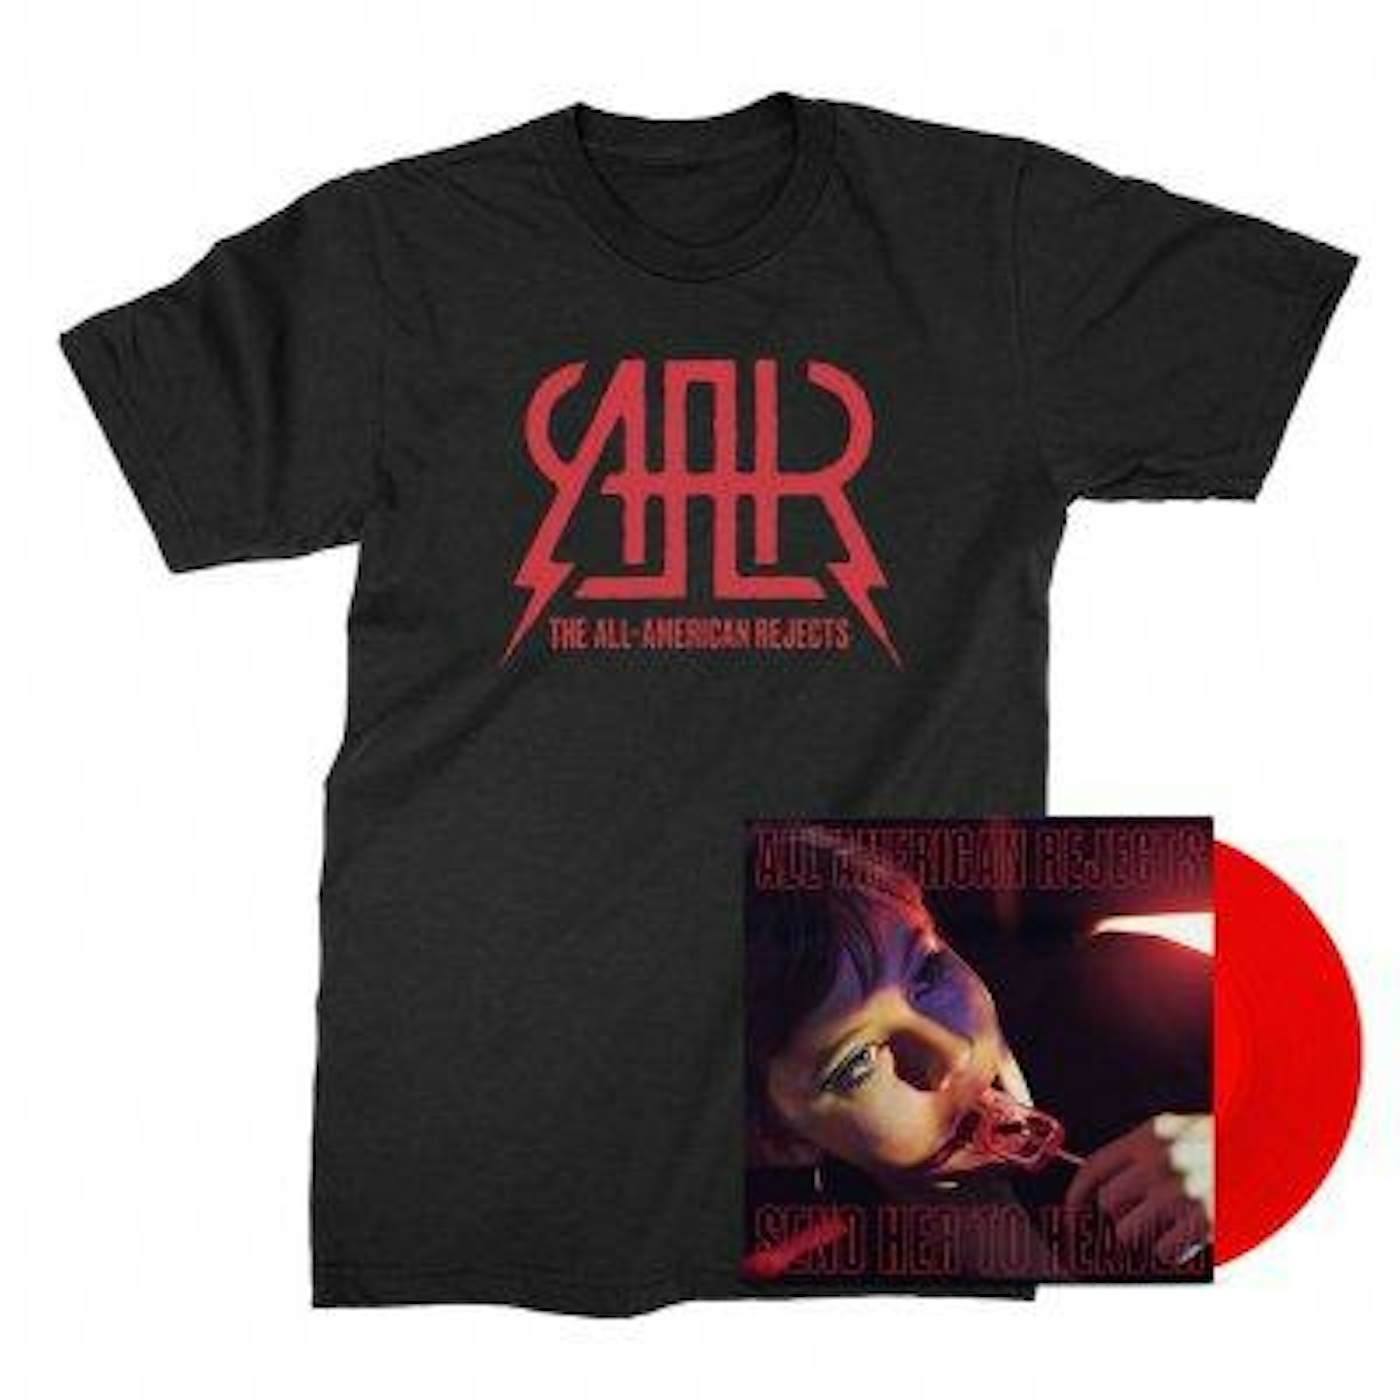 The All-American Rejects Send Her To Heaven 12" (Red) + Logo Tee (Black) Bundle